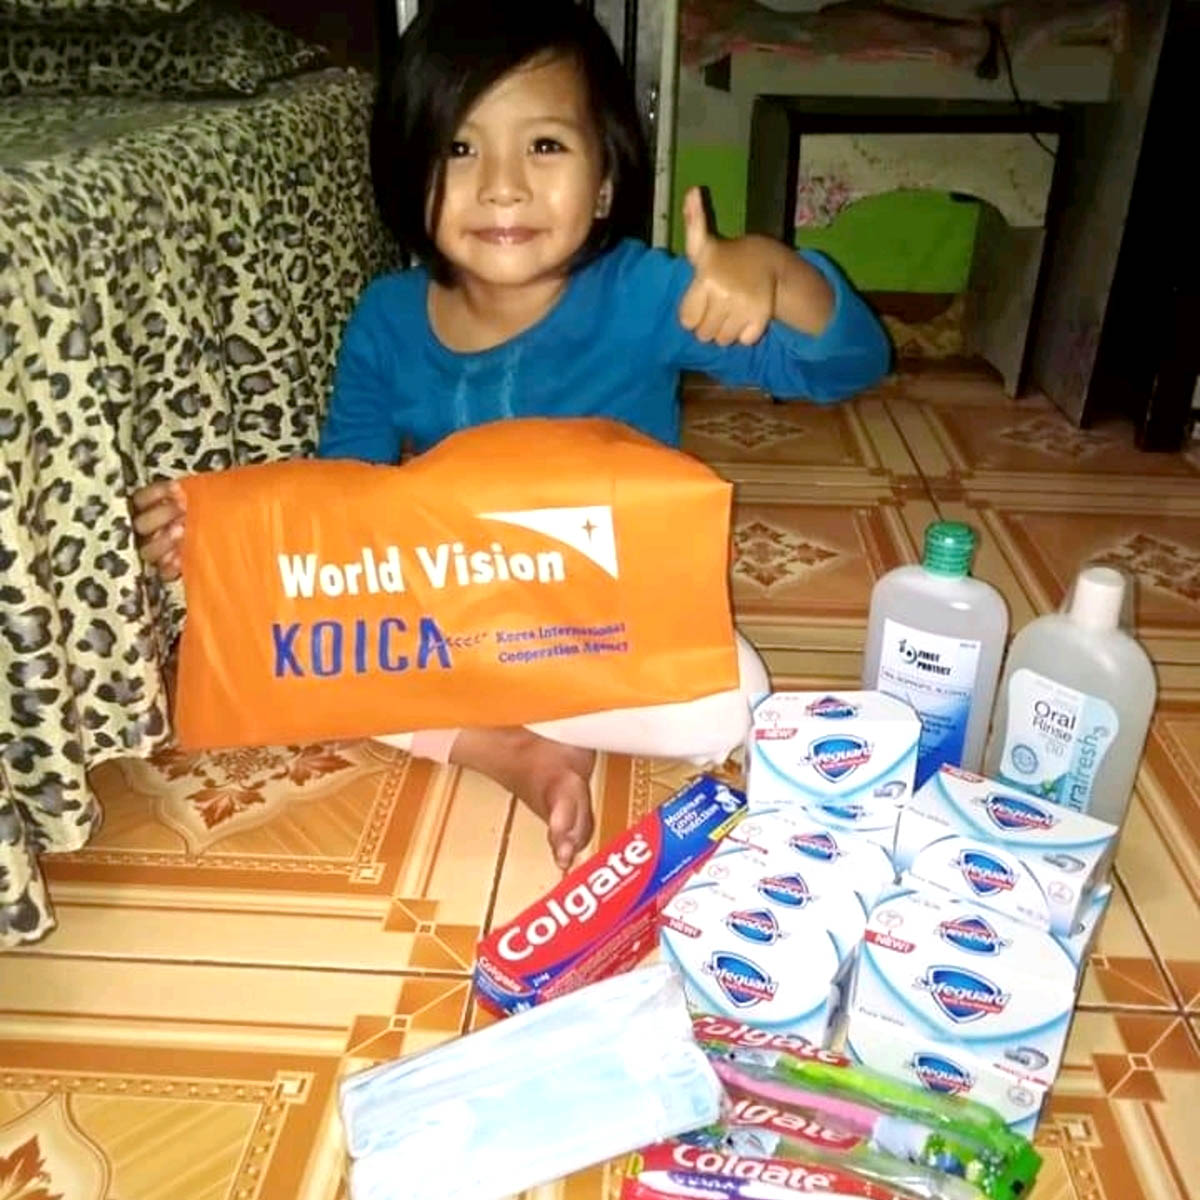 World Vision and KOICA help over 13,500 families affected by the COVID-19 pandemic in Marawi